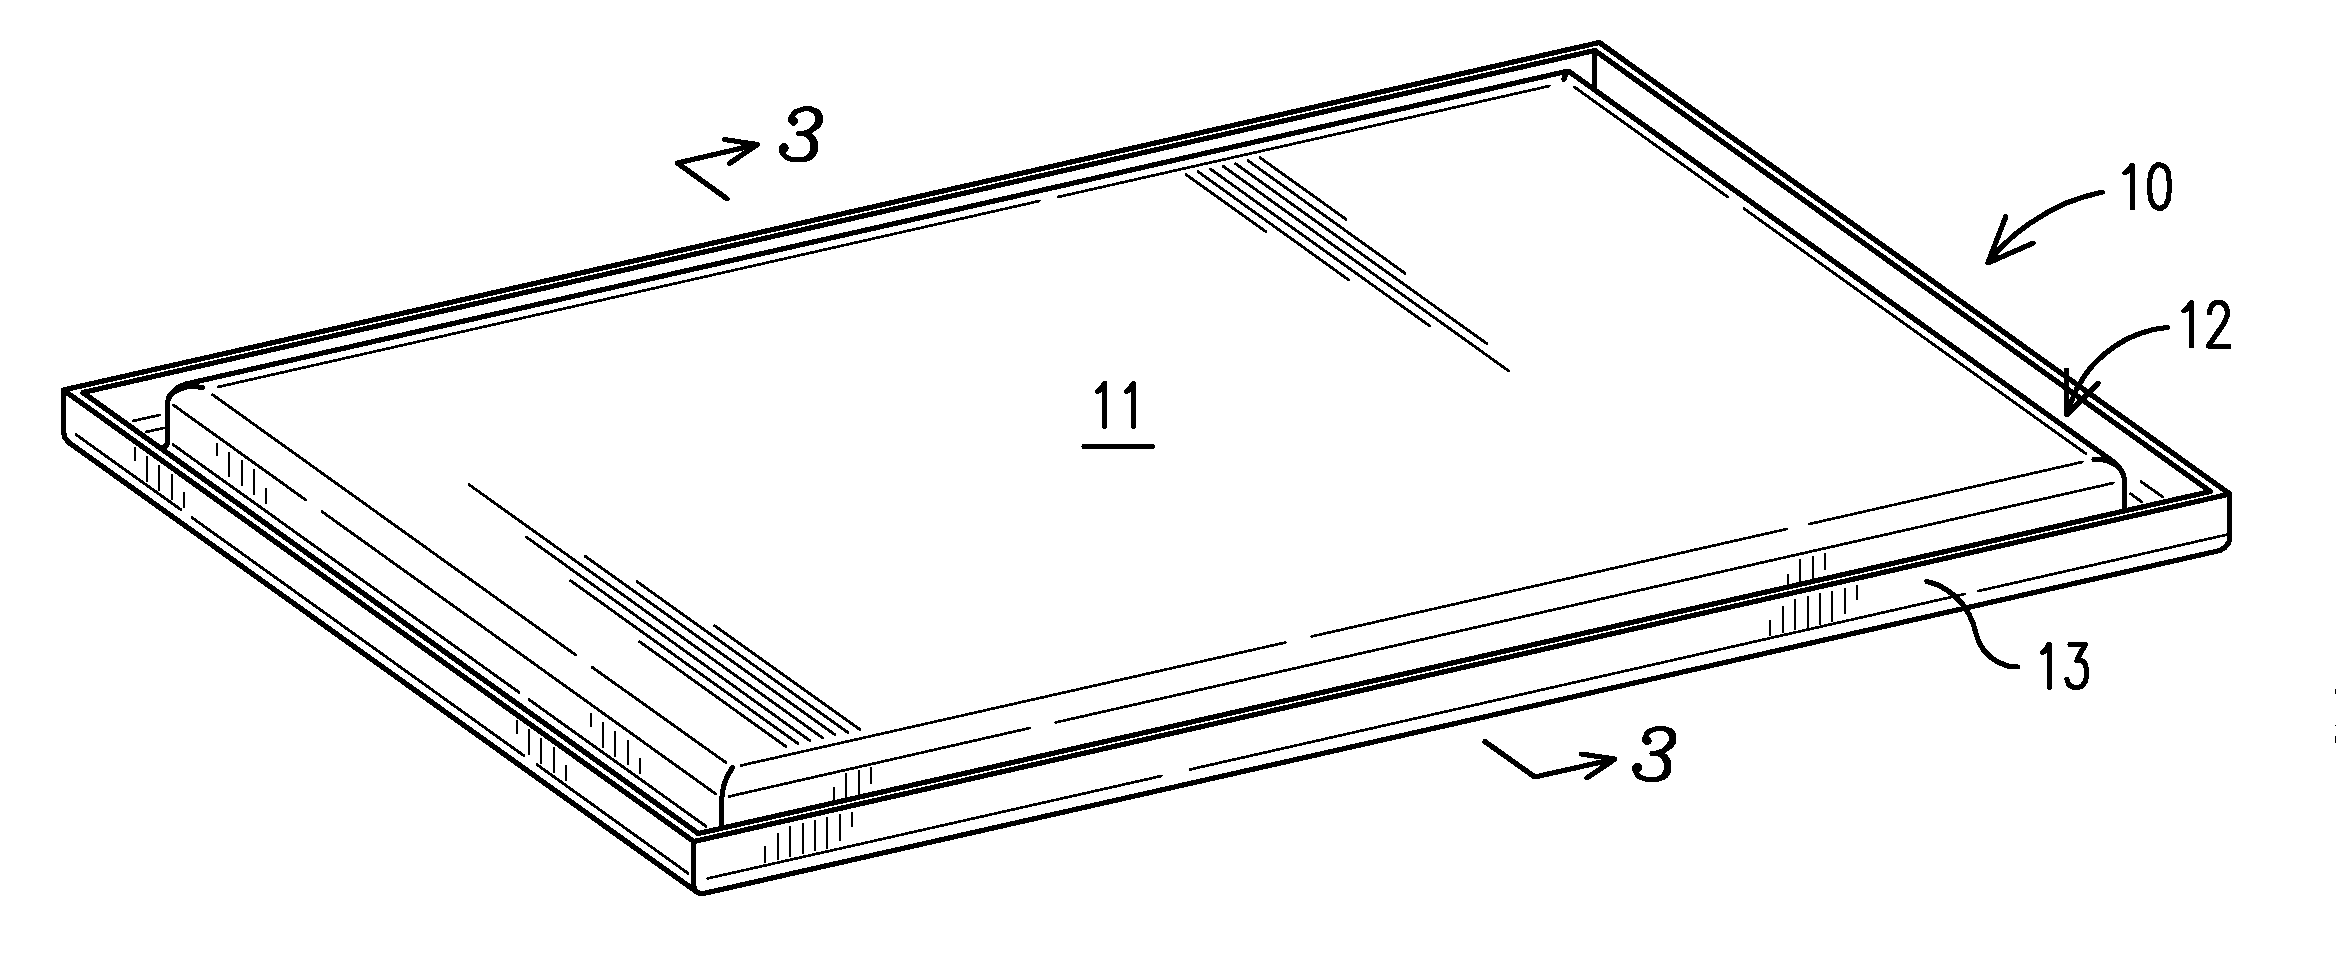 Griddle plate for a gas grill